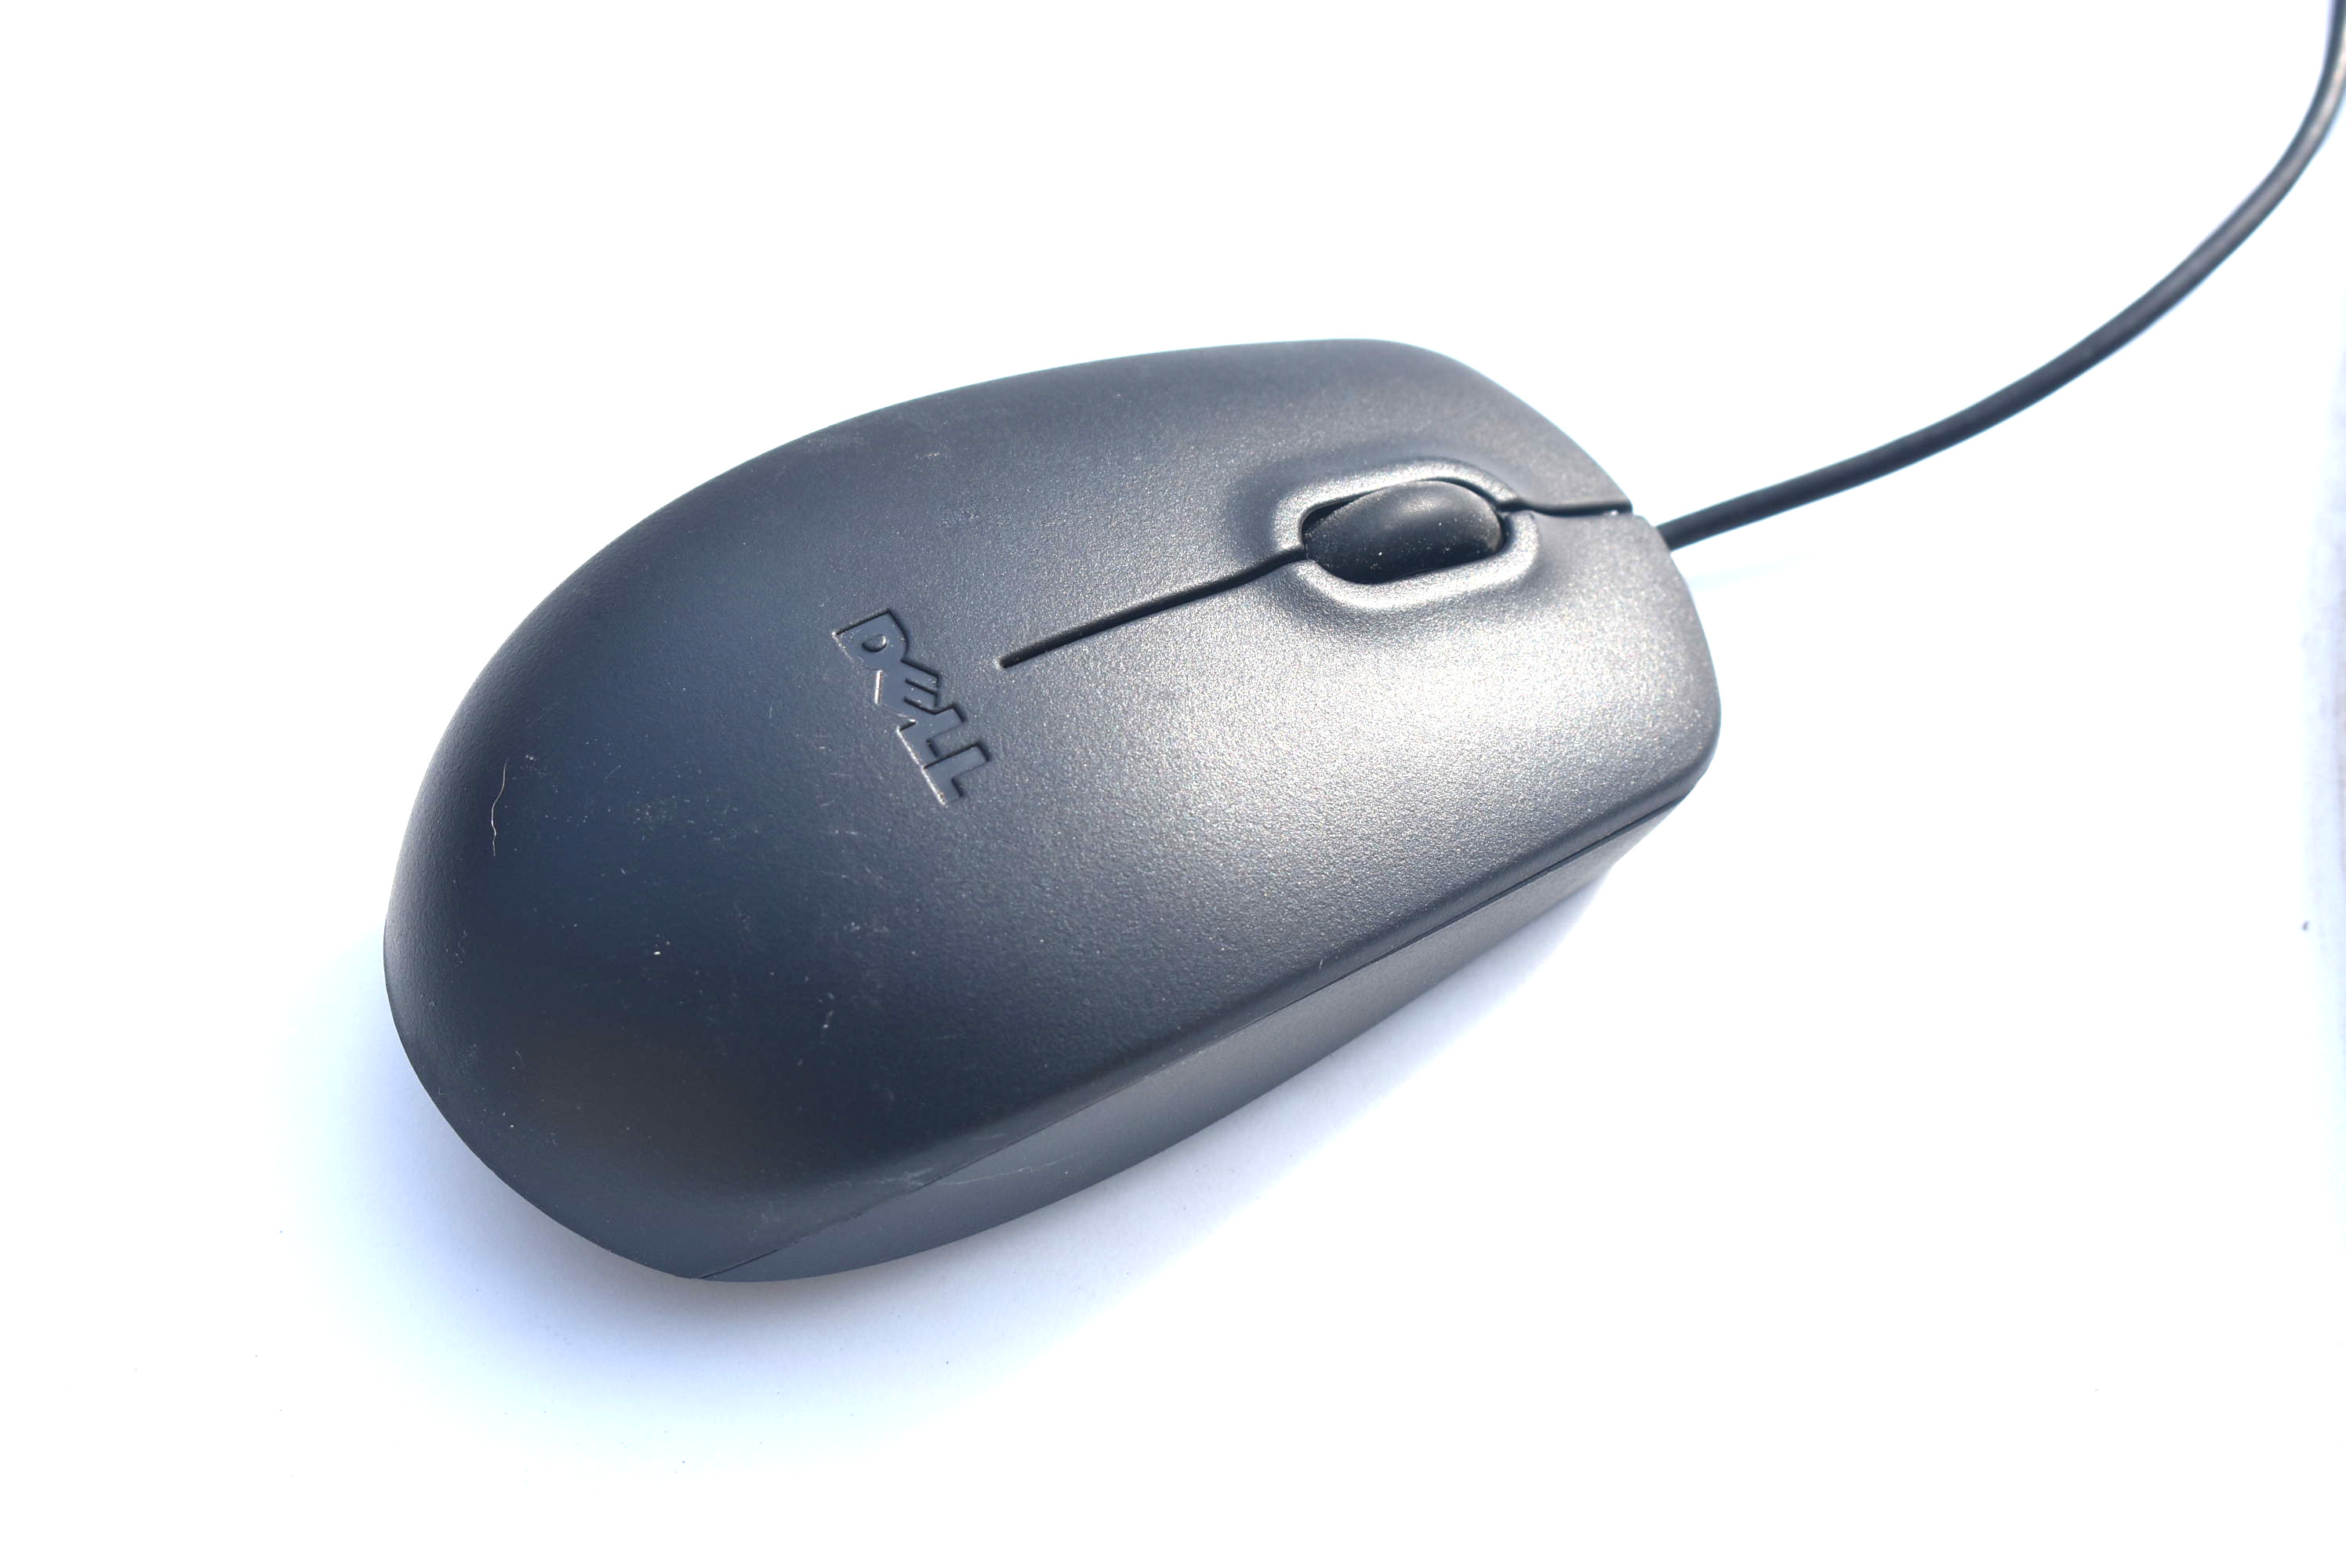 The Correct USB Optical Mouse to build Dell USB Keyboard Combo.